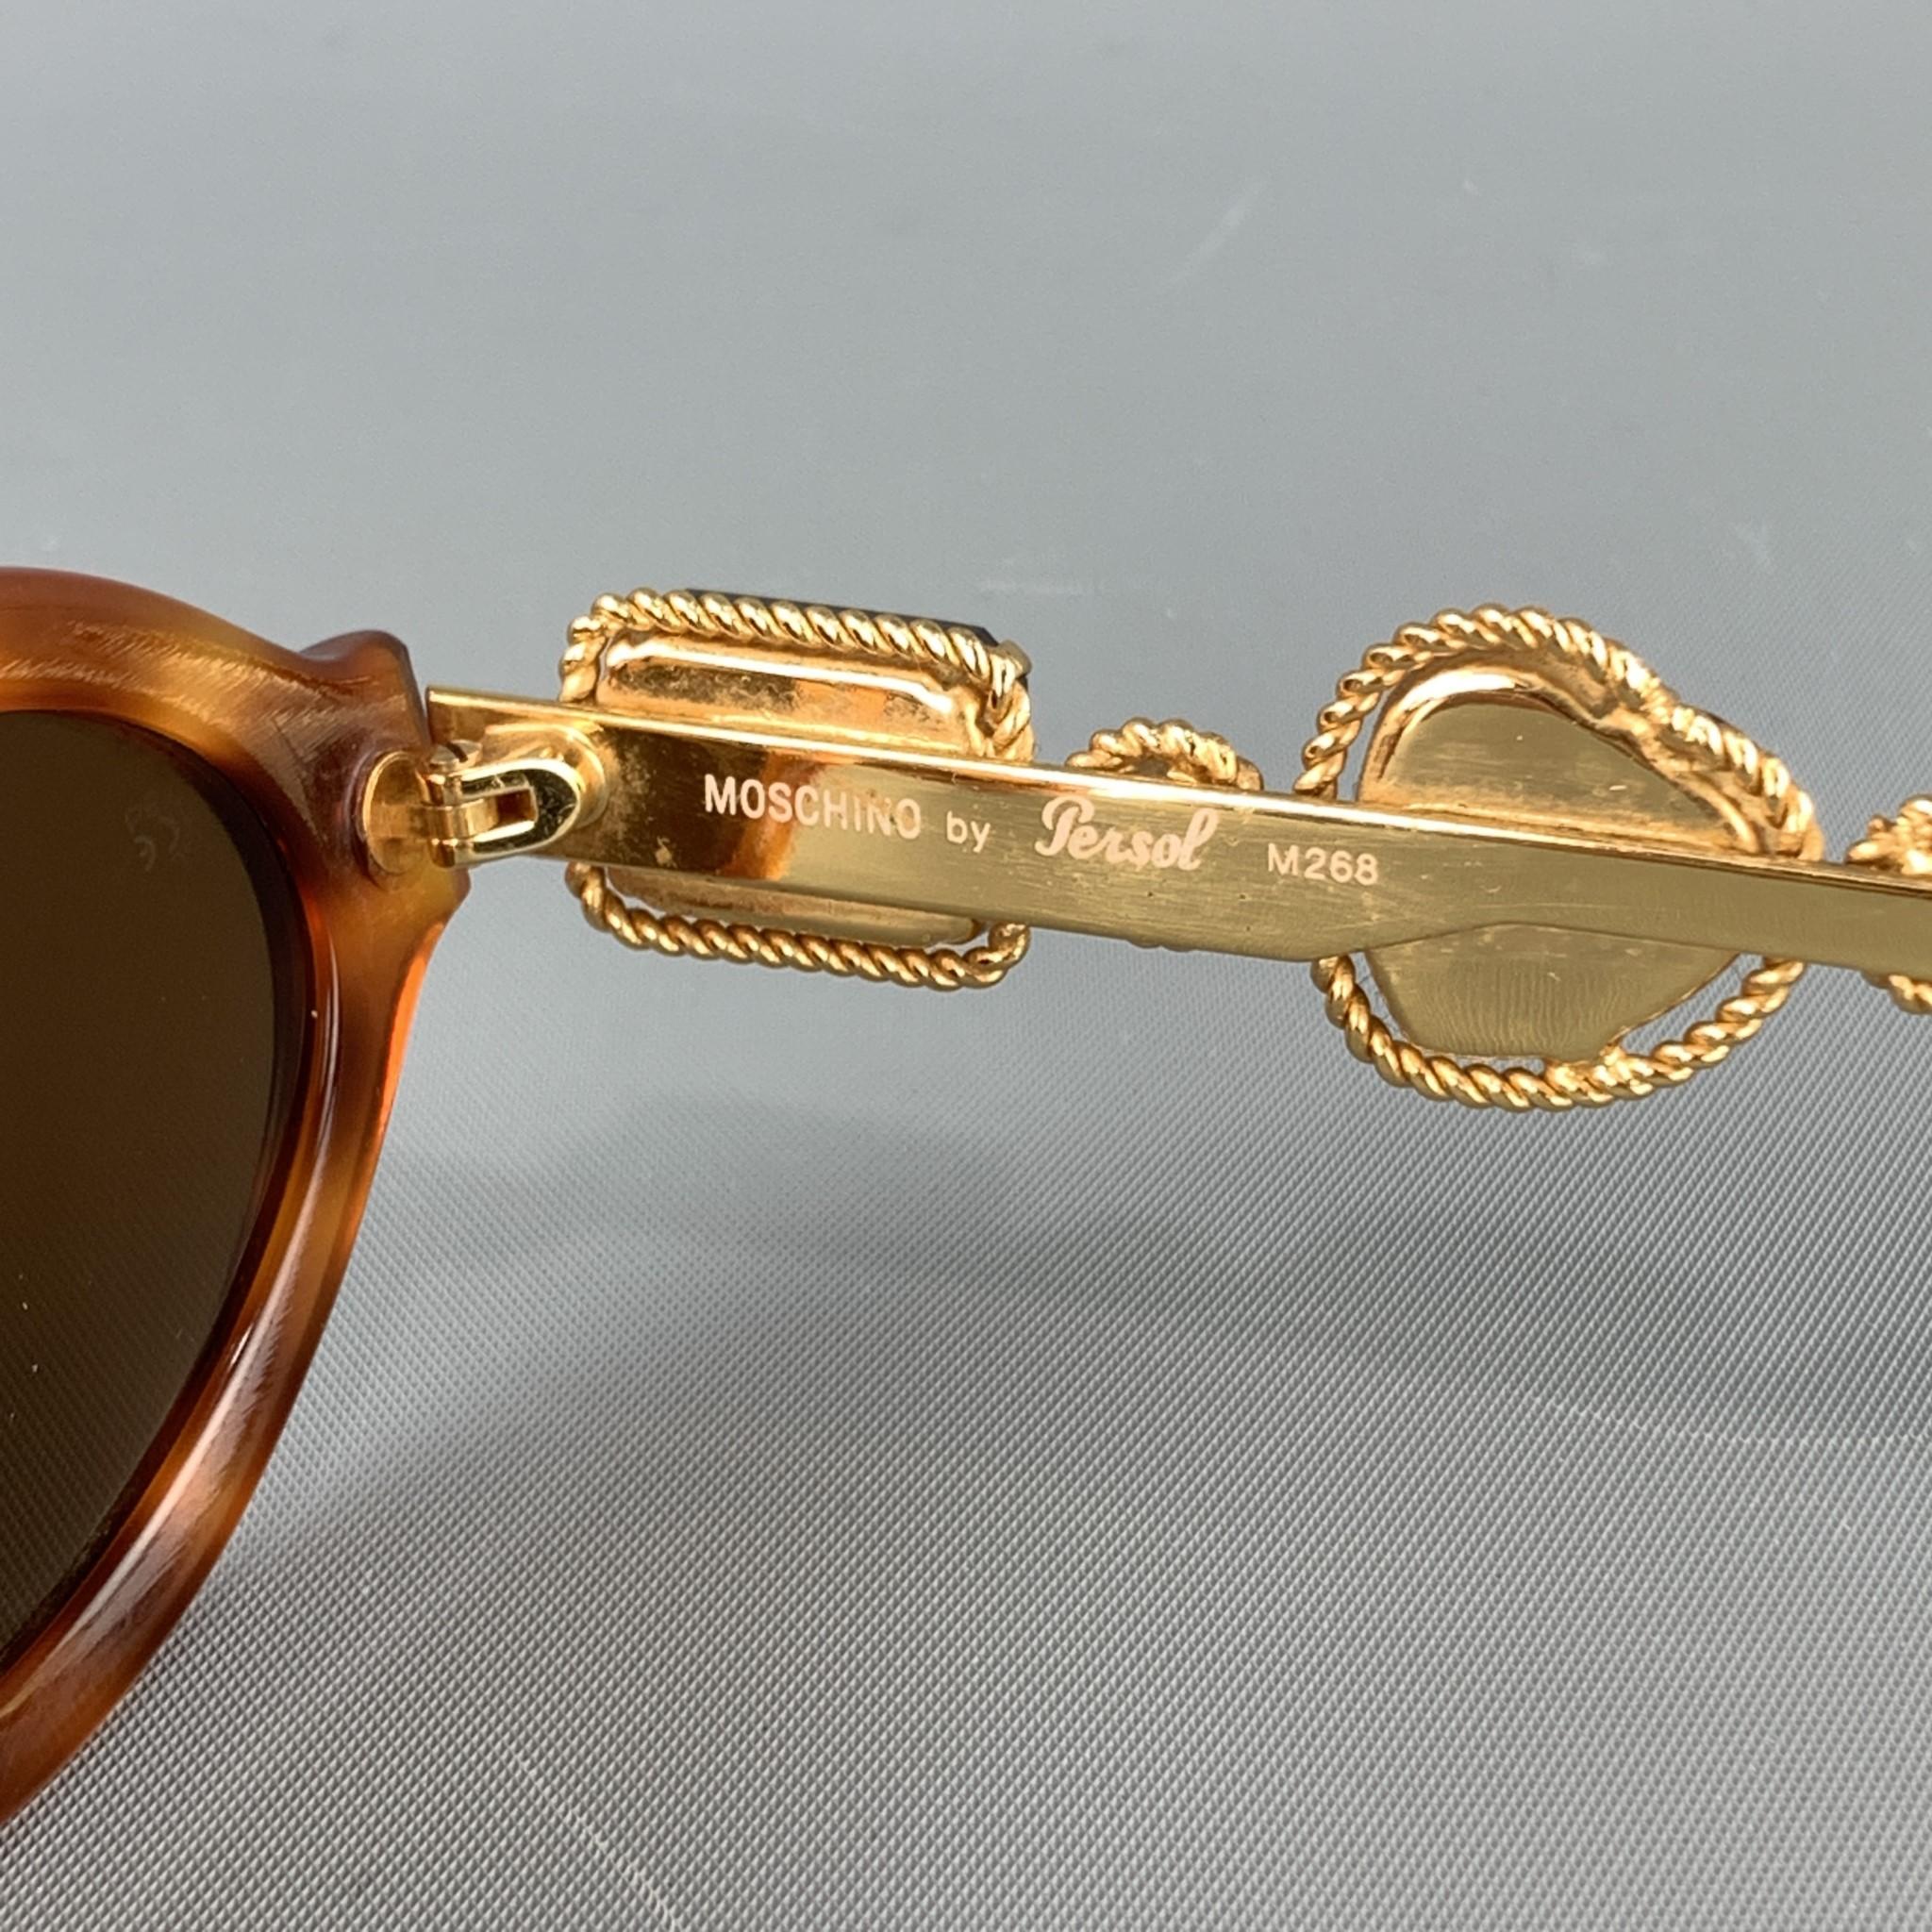 MOSCHINO PERSOL Tortoiseshell Acetate Gem Stone Sunglasses In Excellent Condition In San Francisco, CA